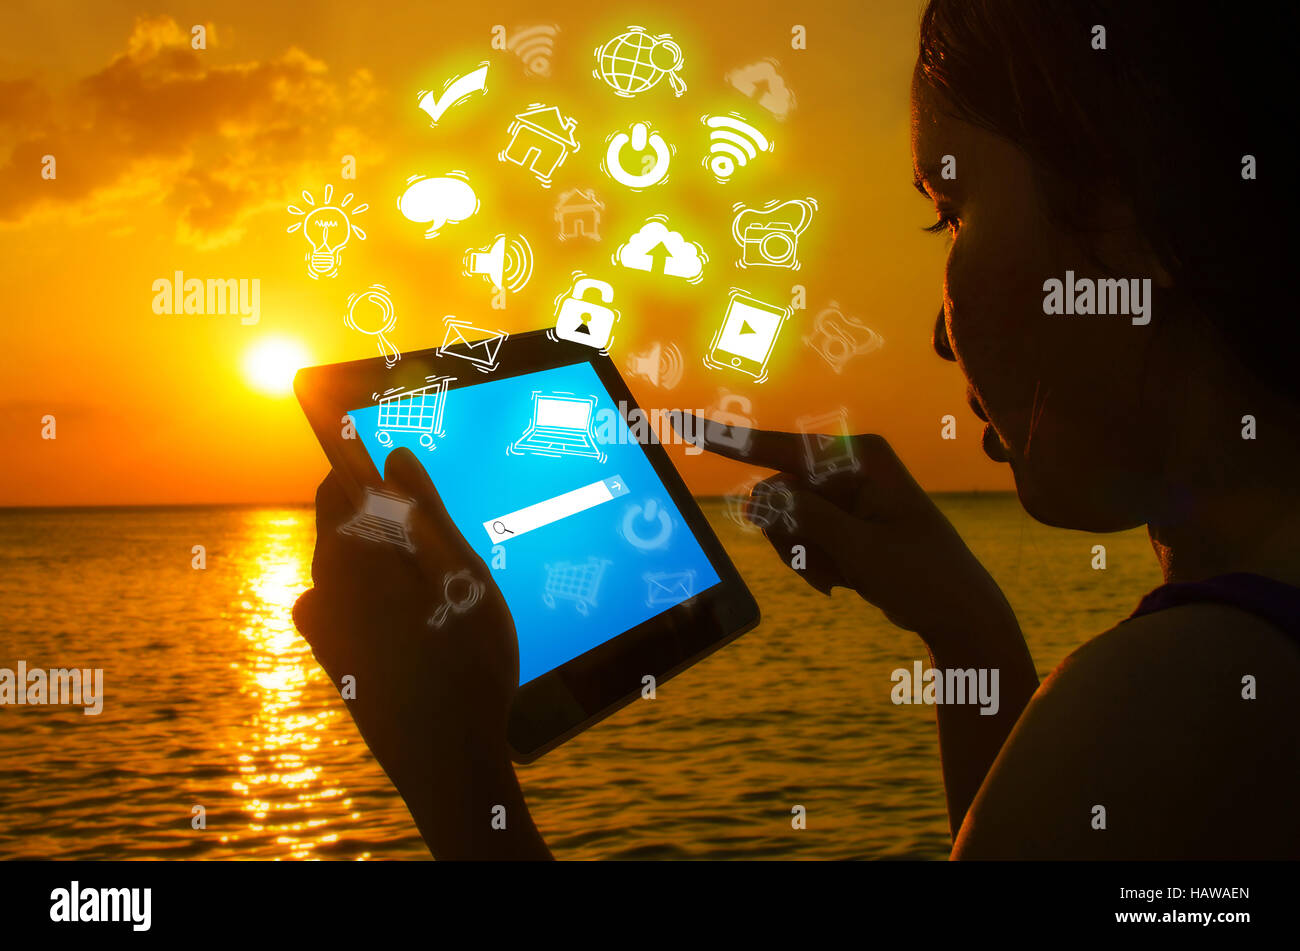 Silhouette woman with digital tablet in hands at sunset beach Stock Photo